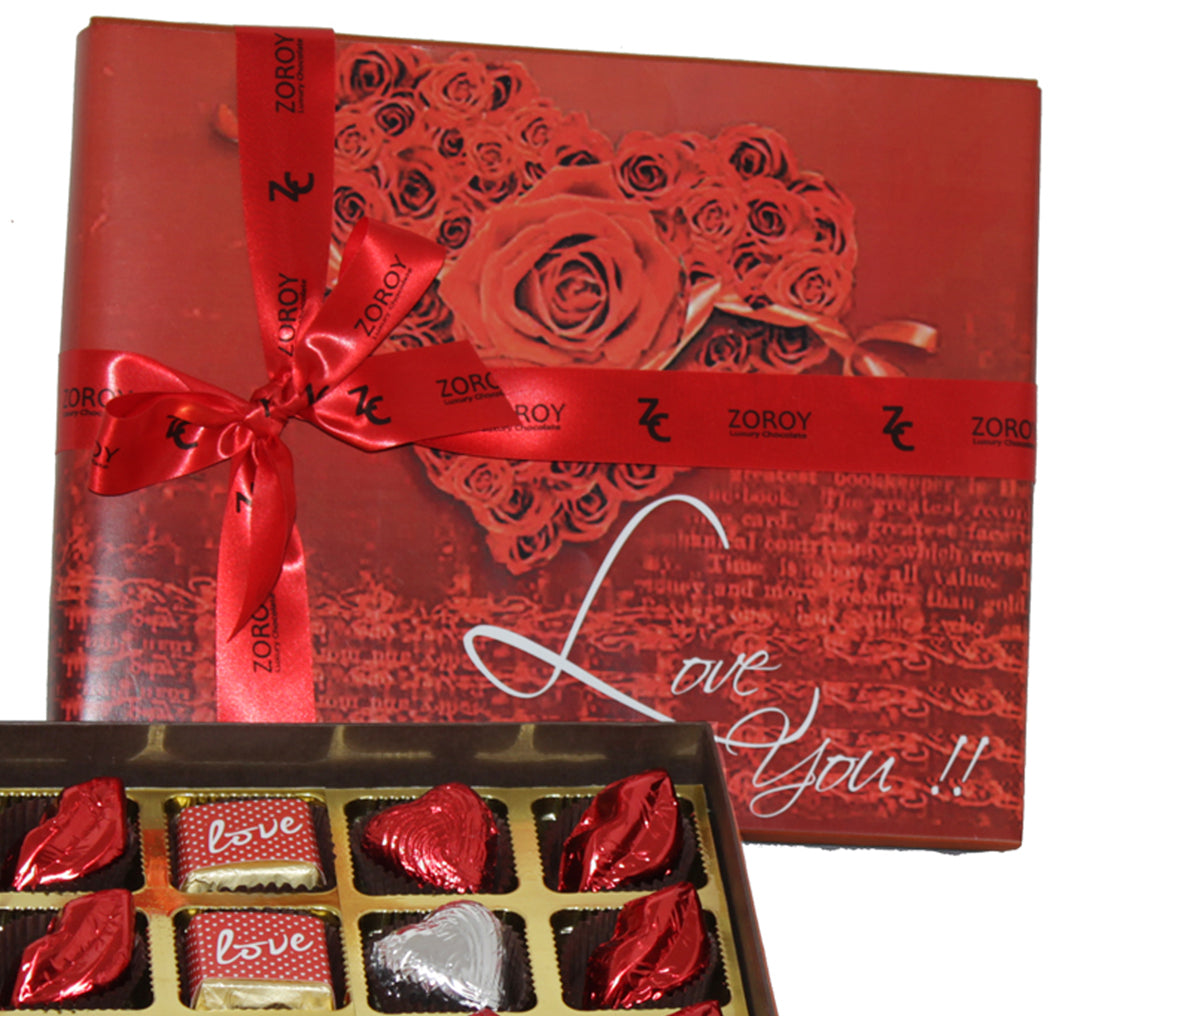 Zoroy Luxury Chocolate Valentines Day Love Gift Eternal Love - Box With 20 Milk Chocolates In Love Shapes For Girlfriend | BoyFriend Anniversary Gifts For Wife | Husband | Love Message Chocolates